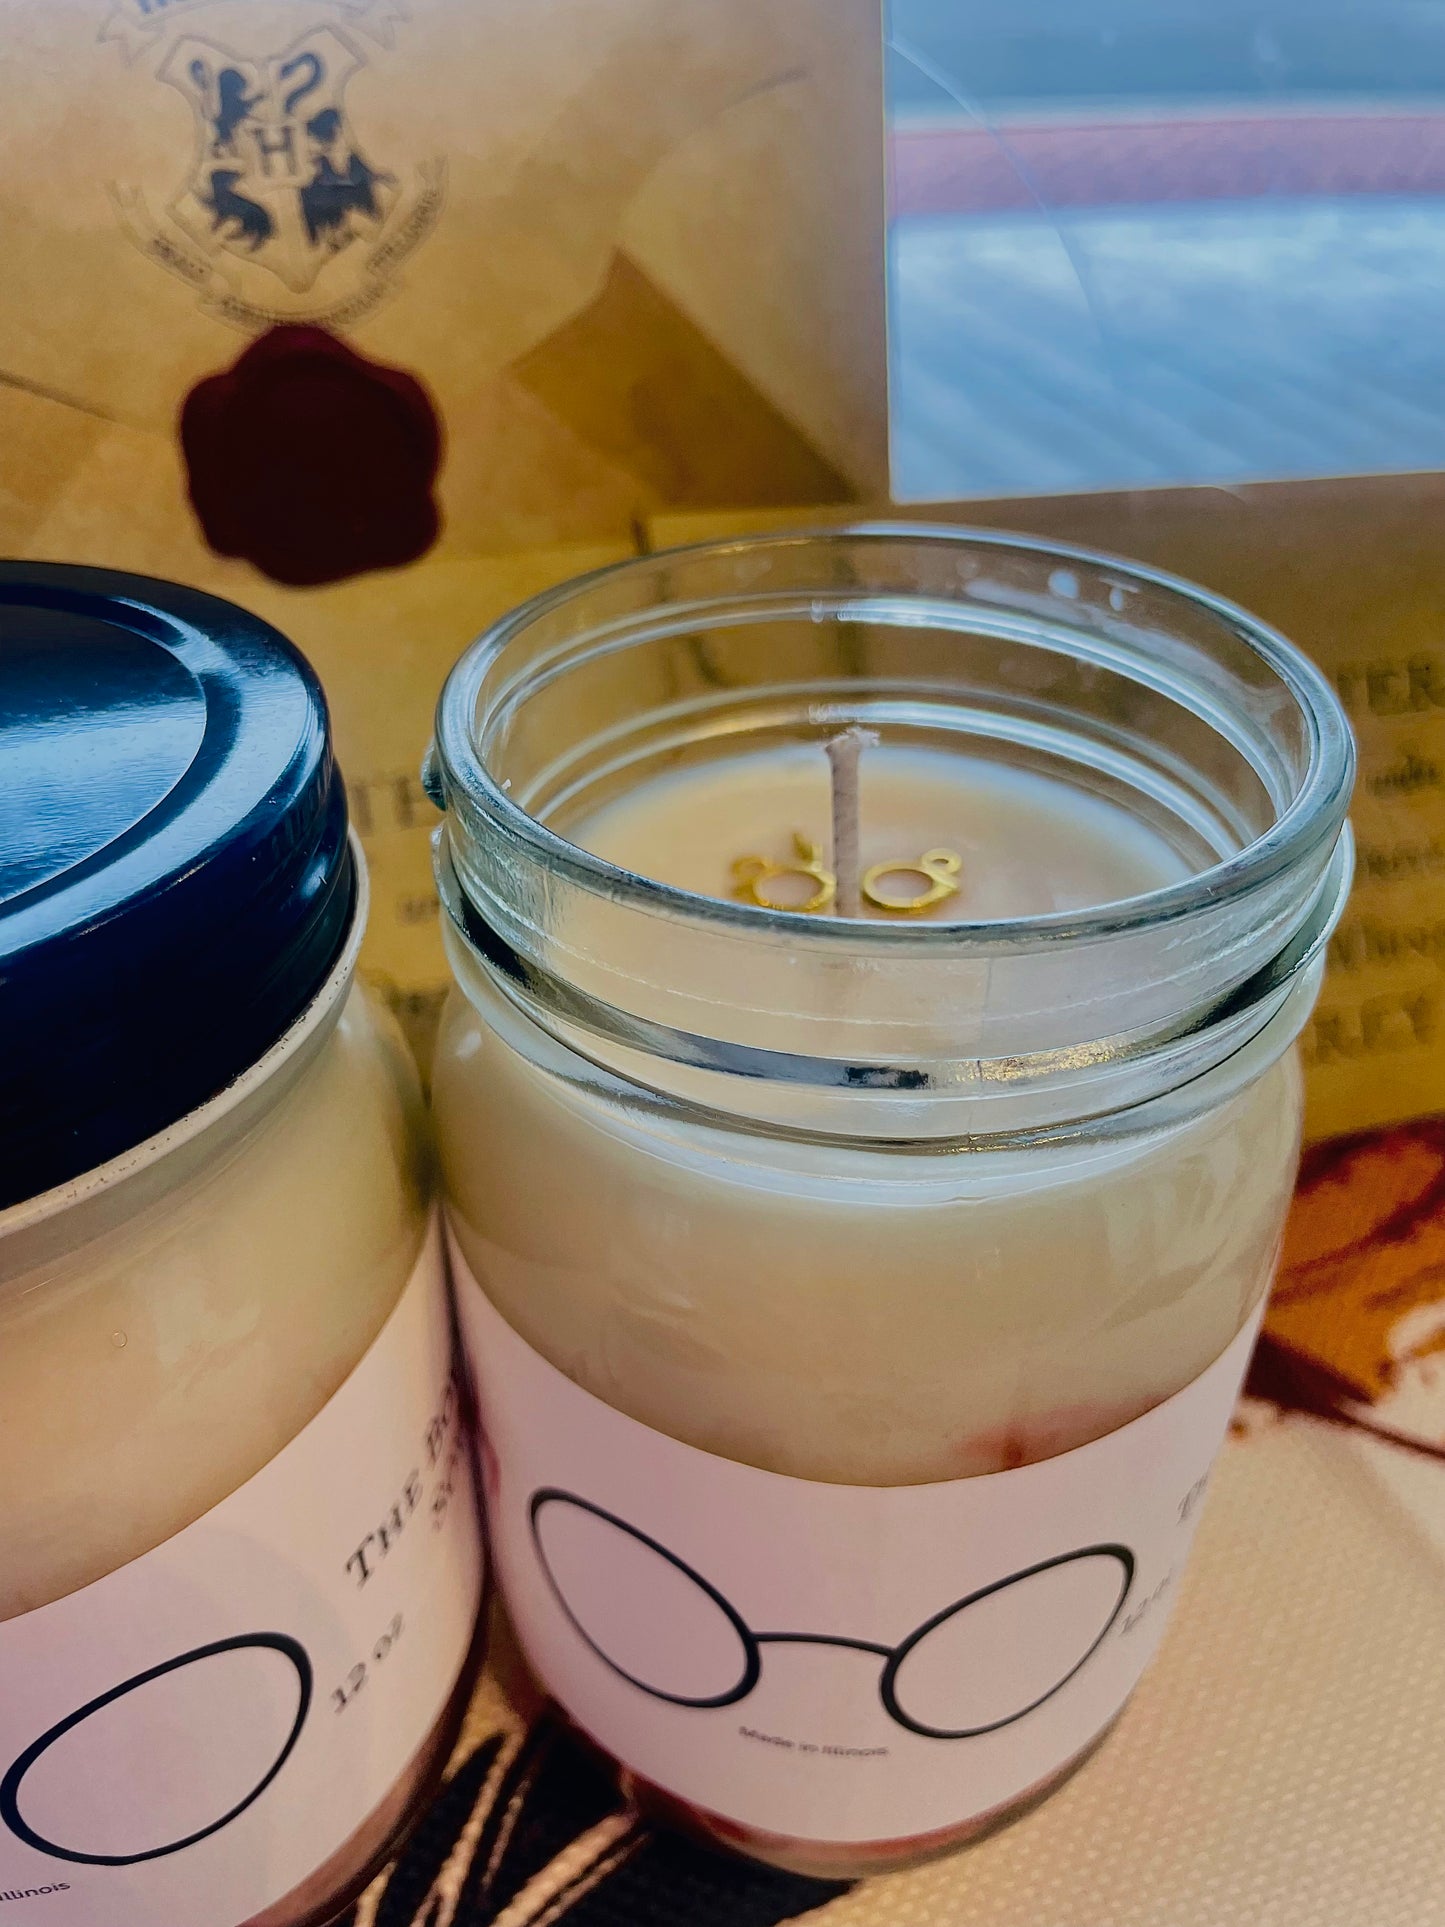 The Boy Who Lived Soy Candle